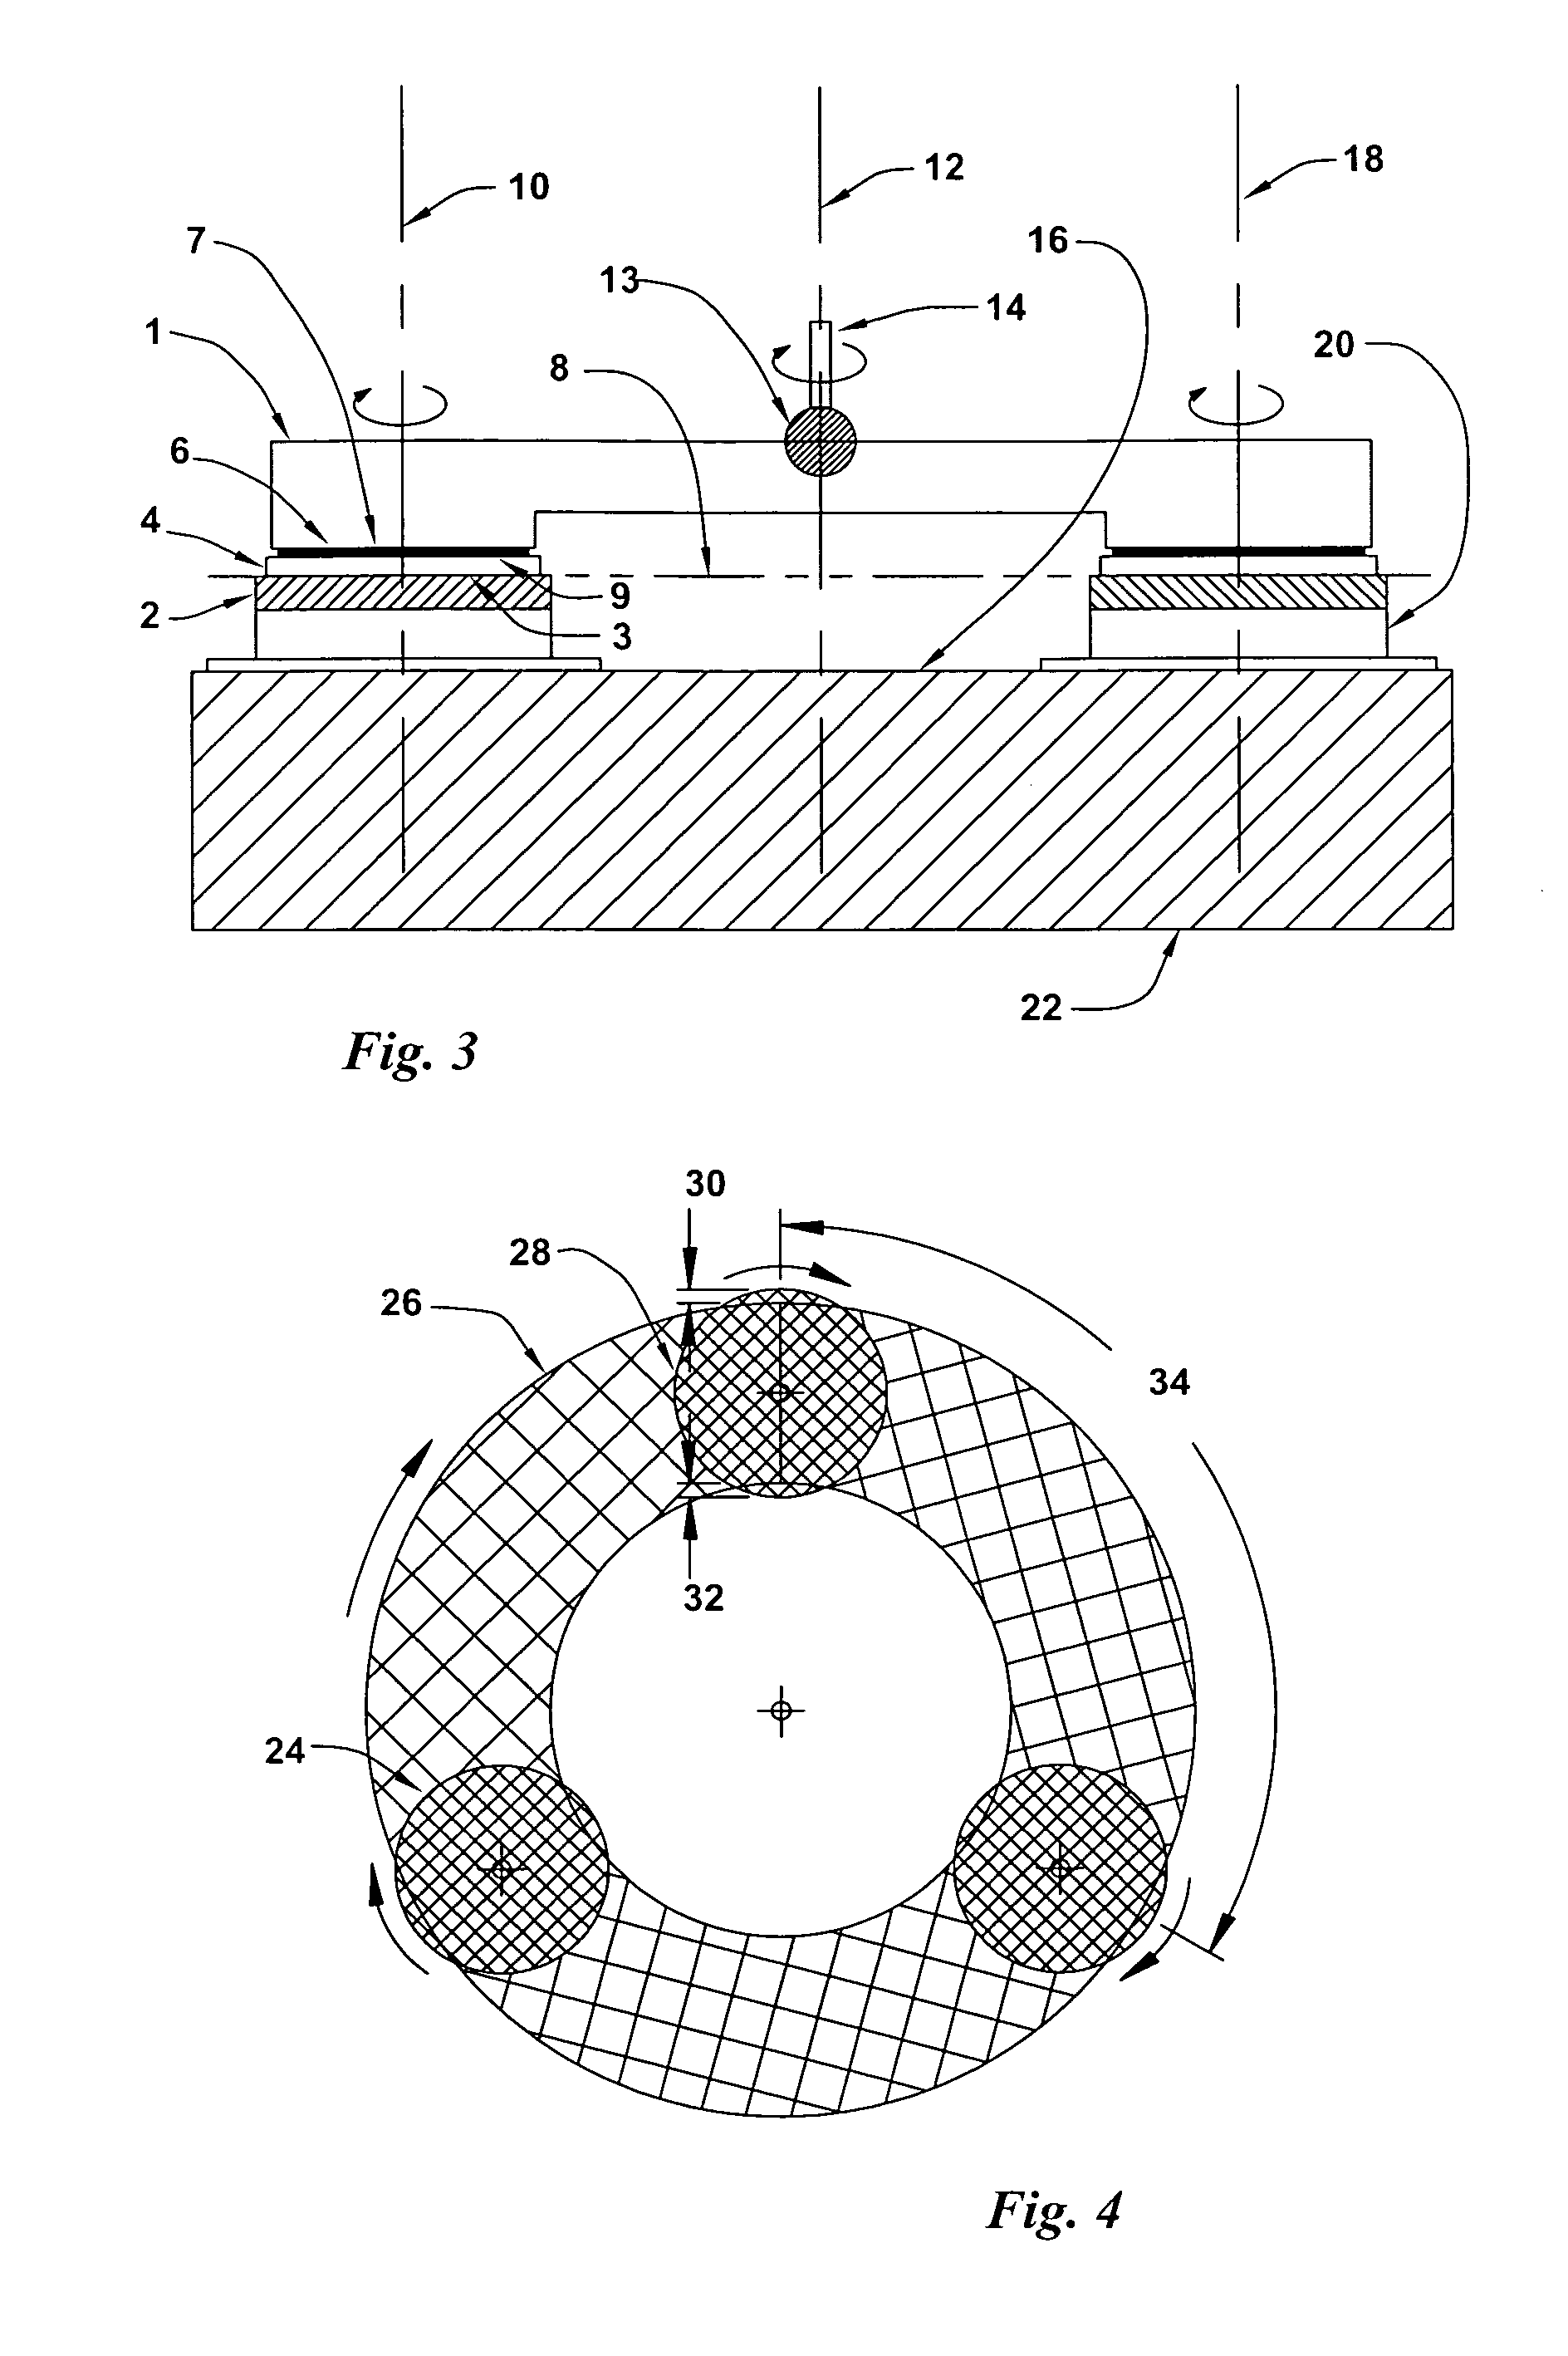 Three-point spindle-supported floating abrasive platen